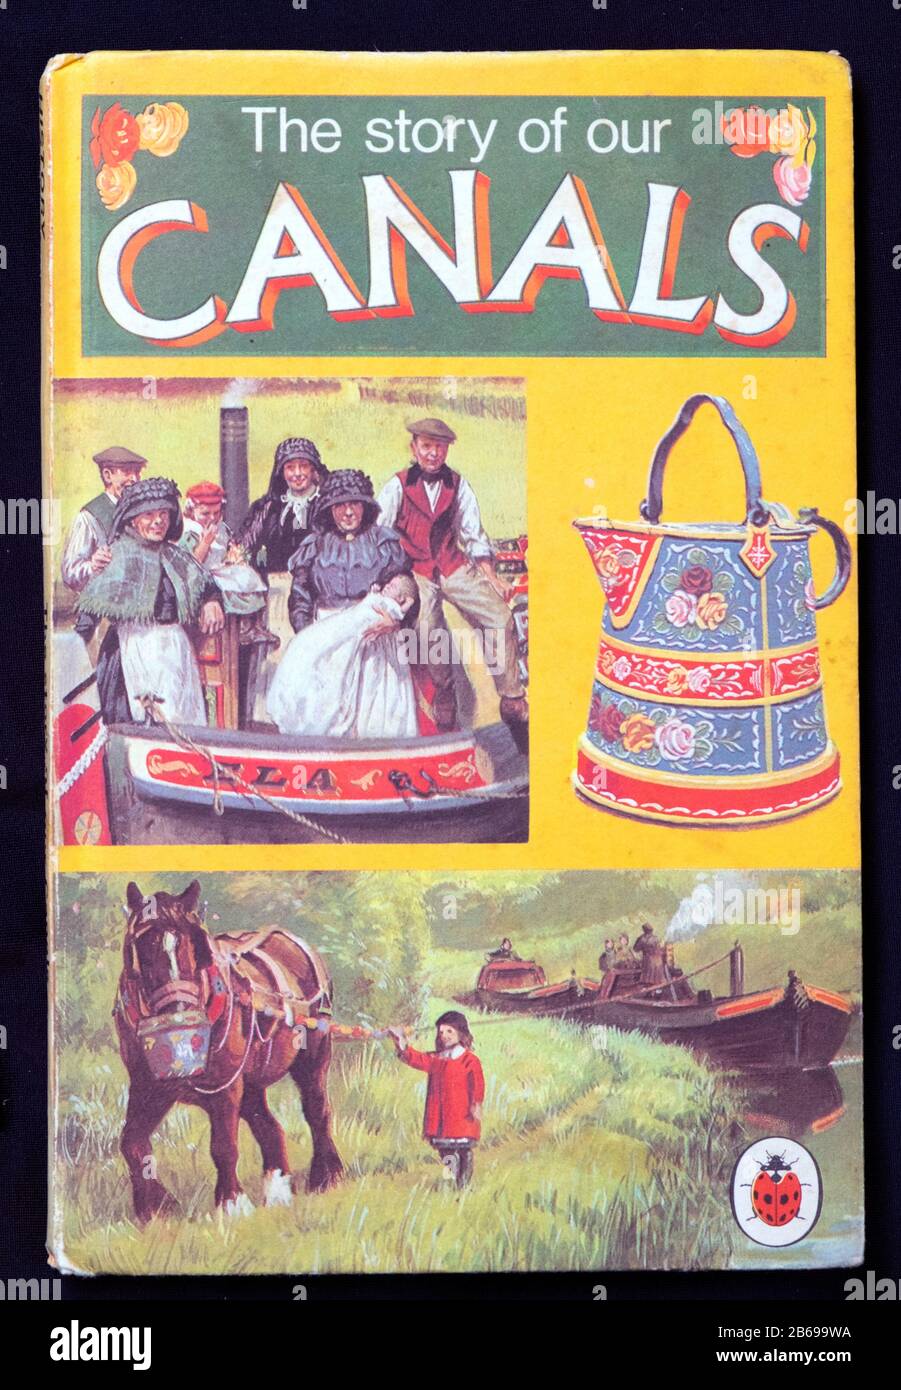 1970er Jahre Ladybird Buch-Cover "The Story of Our Canals" England UK KATHY DEWITT Stockfoto